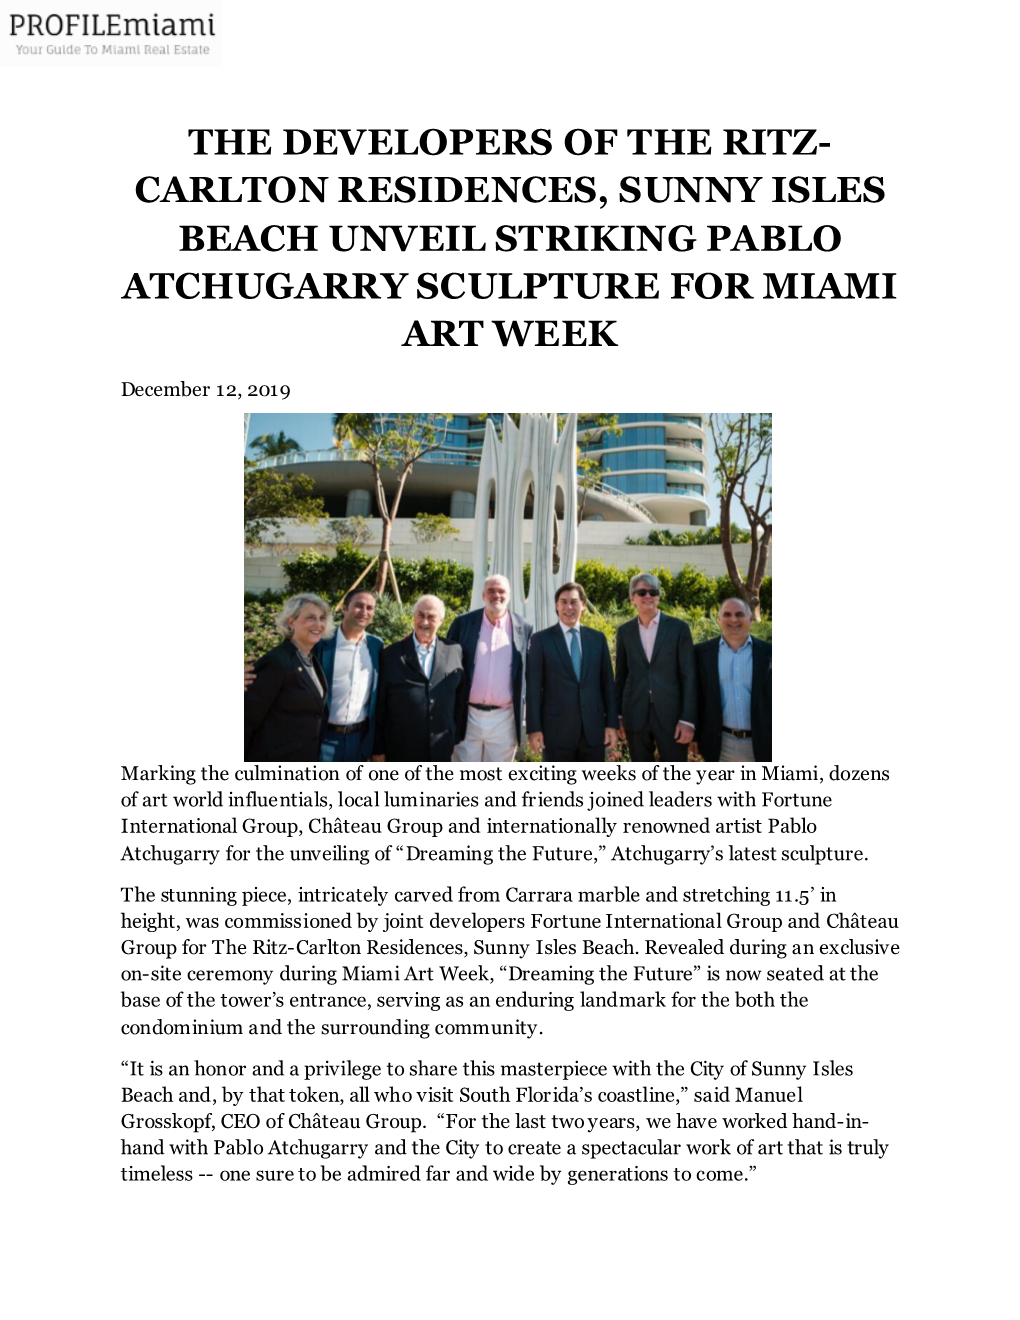 The Developers of the Ritz Carlton Residences, Sunny Isles Beach